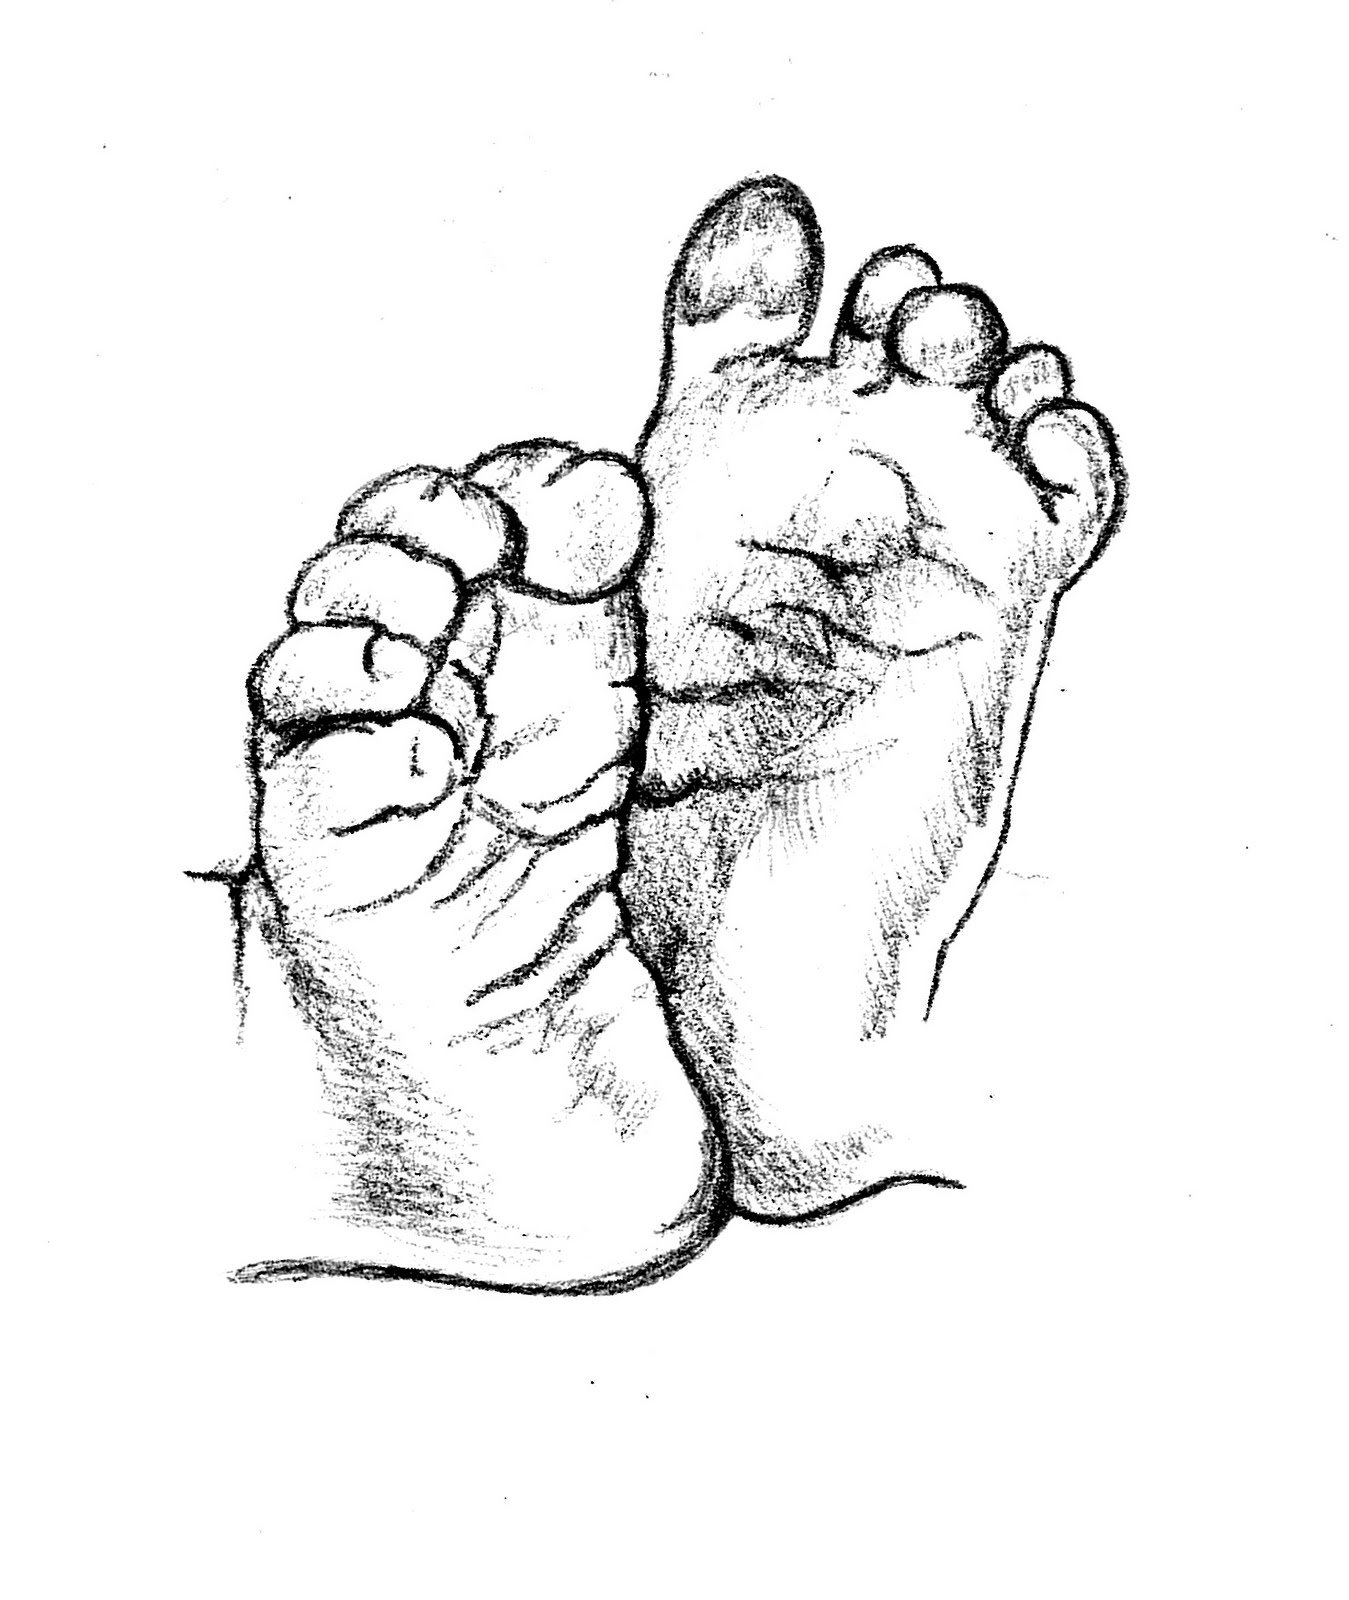 Baby Feet Drawings - ClipArt Best